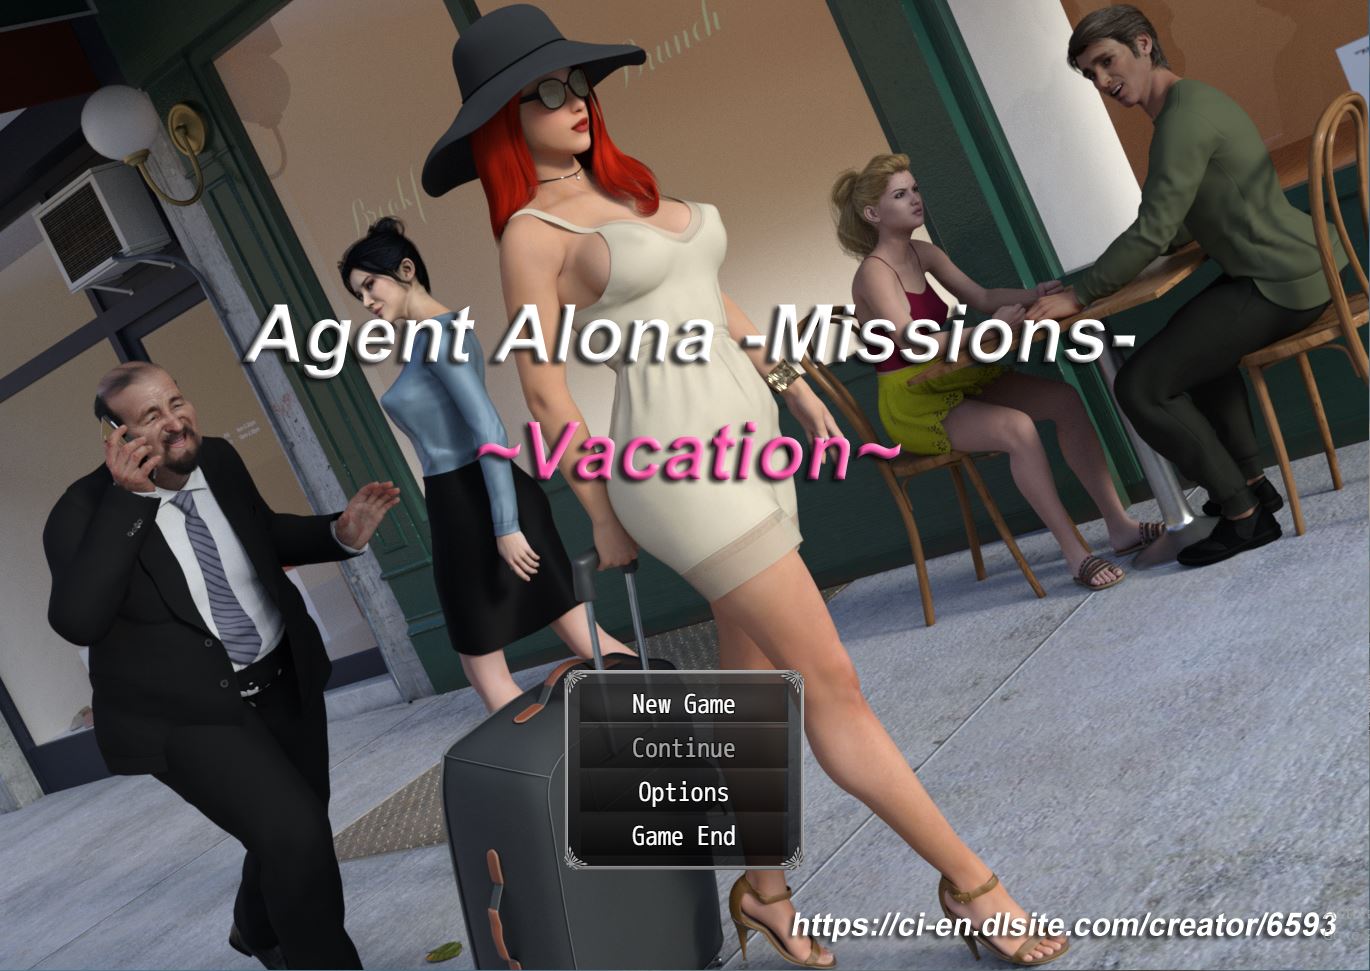 Sex Alona - Adultgamesworld: Free Porn Games & Sex Games Â» Agent Alona Missions â€“  Vacation â€“ New Uncensored Edition (Full Game) [Combin Ation]